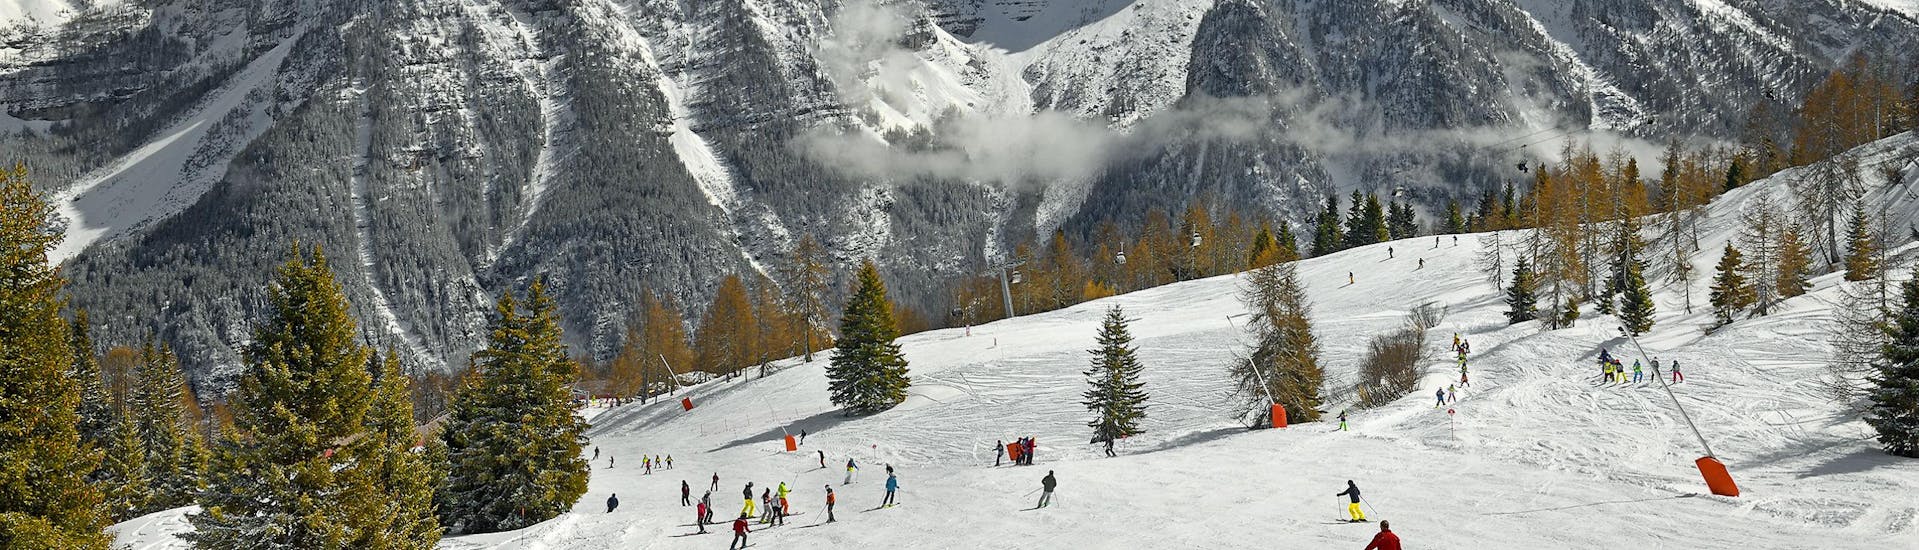 A view of a snowy mountain top in the ski resort of Trentino, where ski schools gather to start their ski lessons.